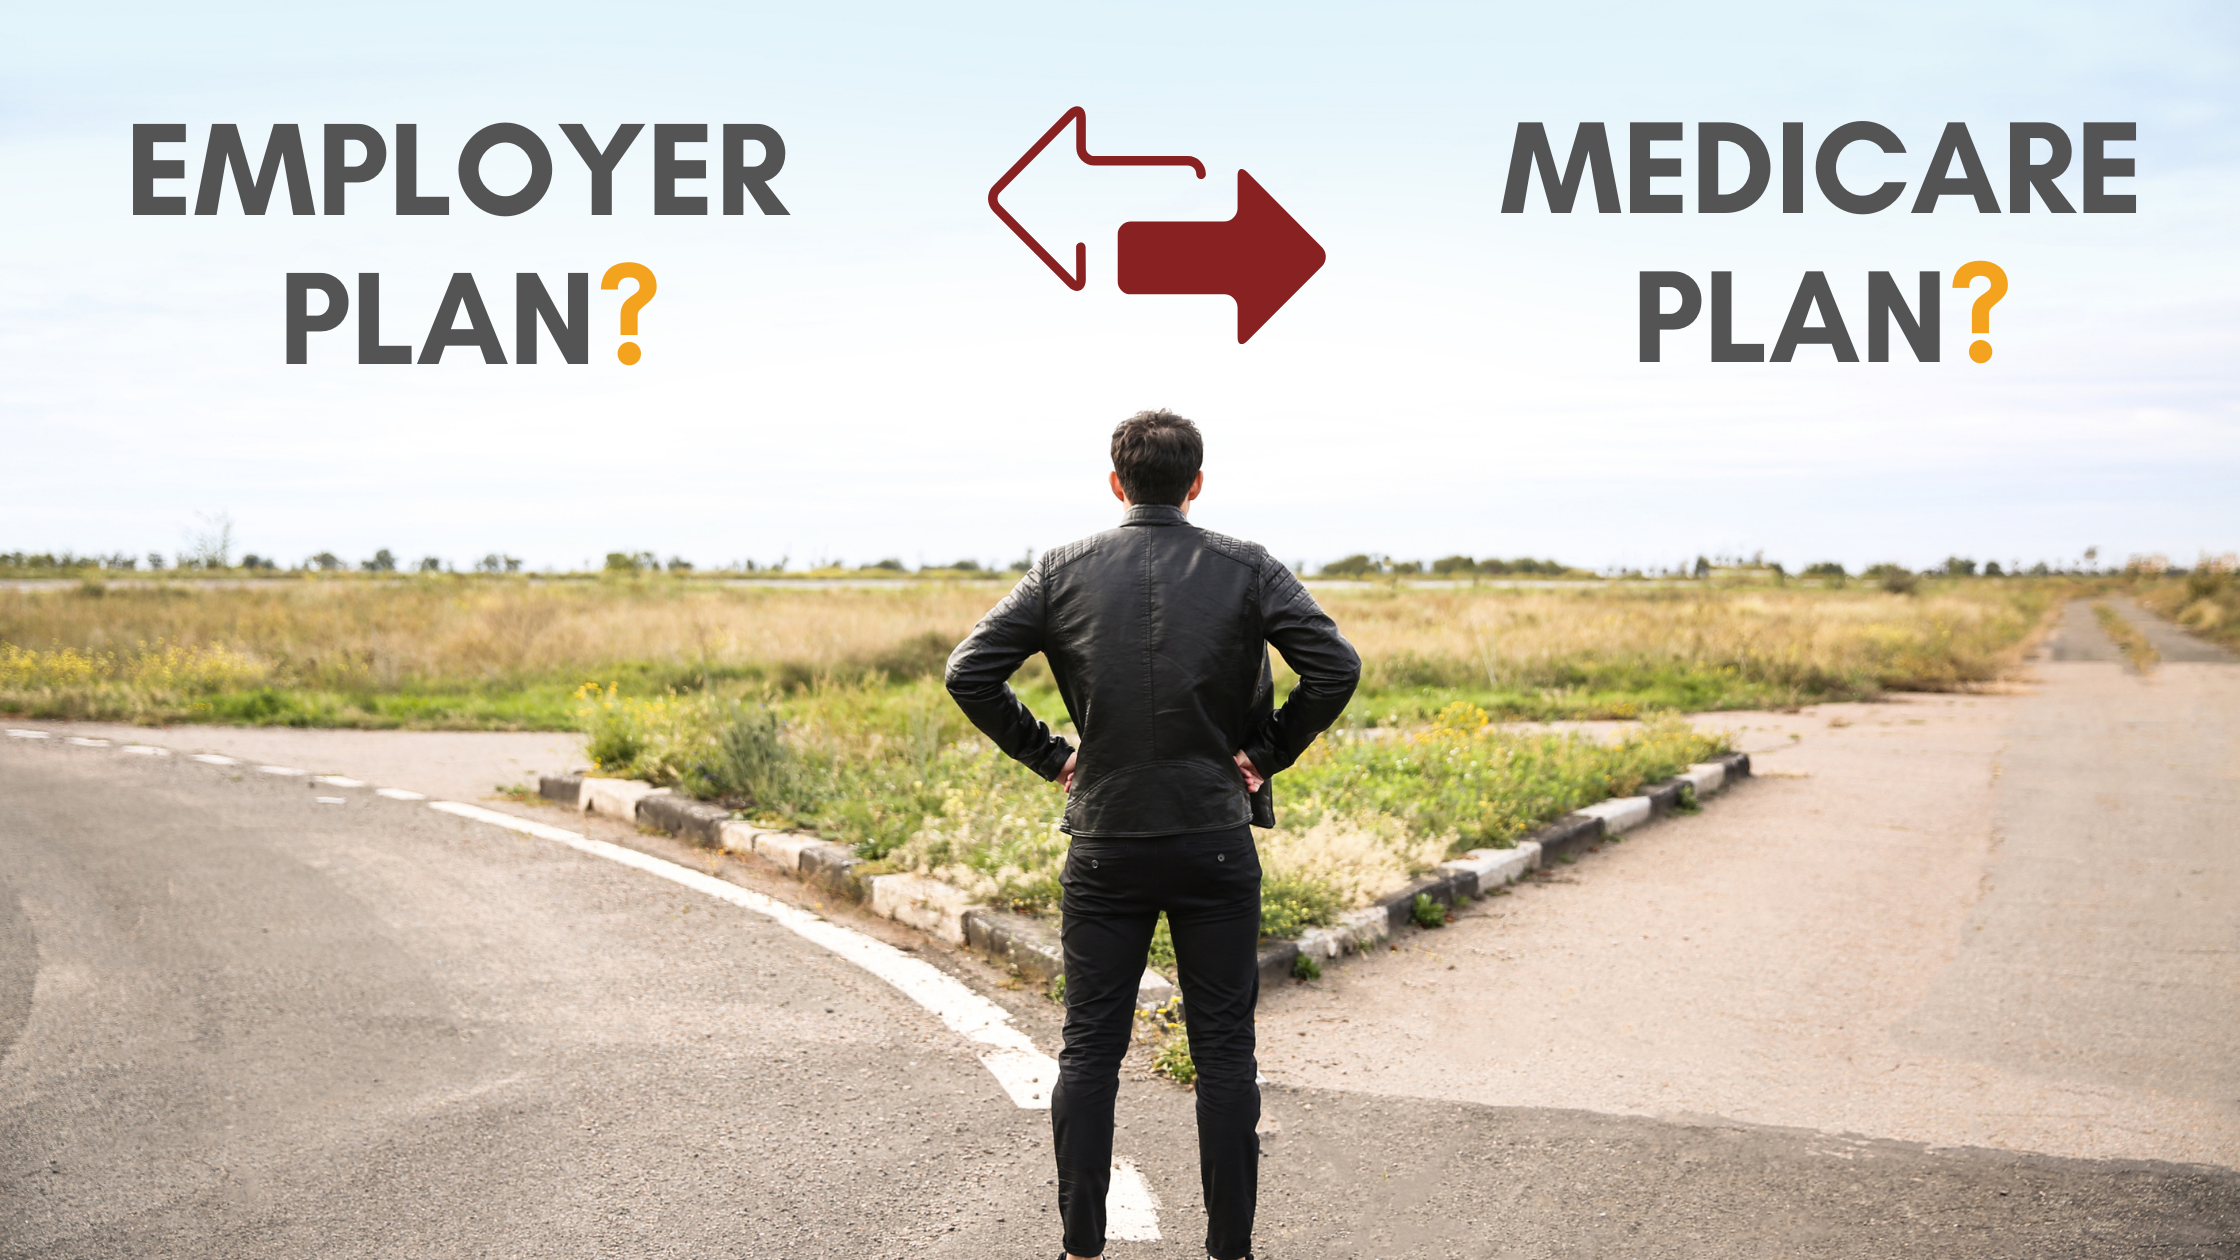 How does Medicare work with employer coverage